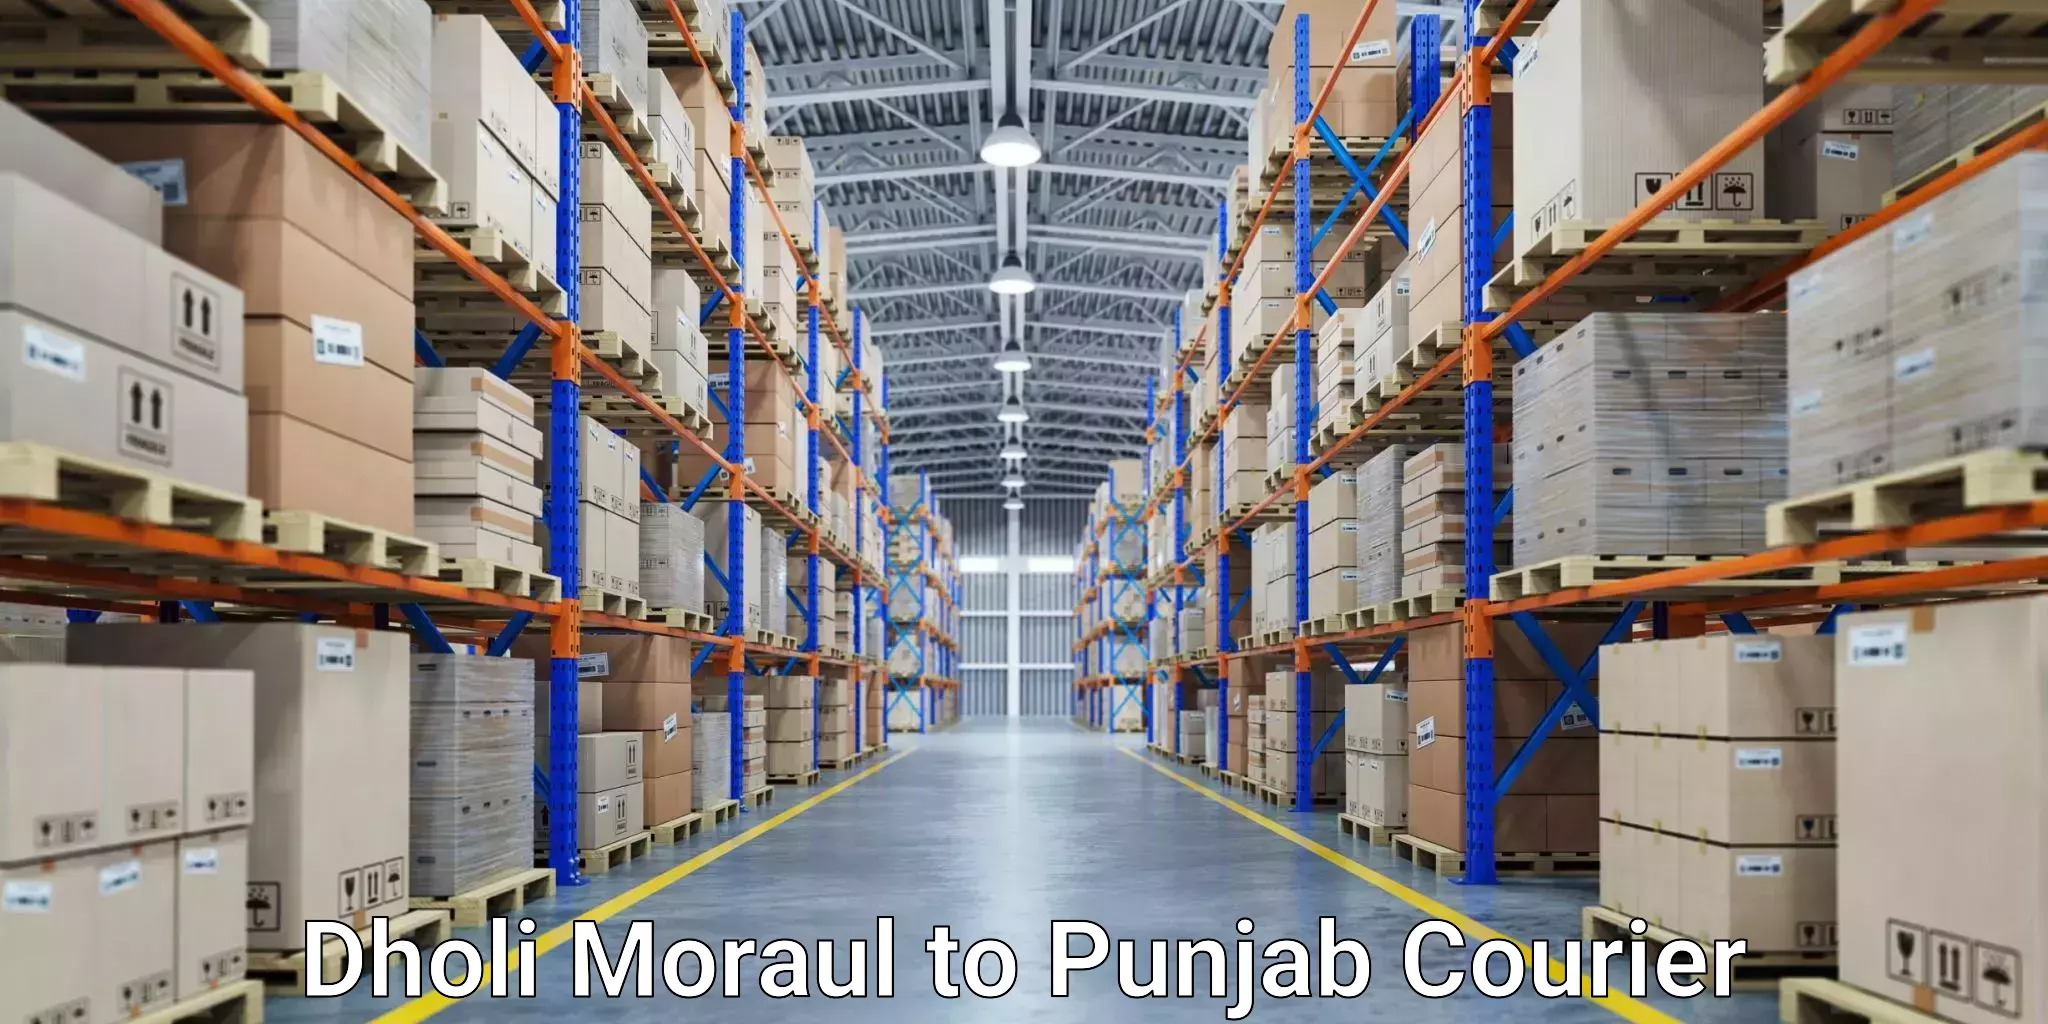 Discount courier rates Dholi Moraul to Sultanpur Lodhi